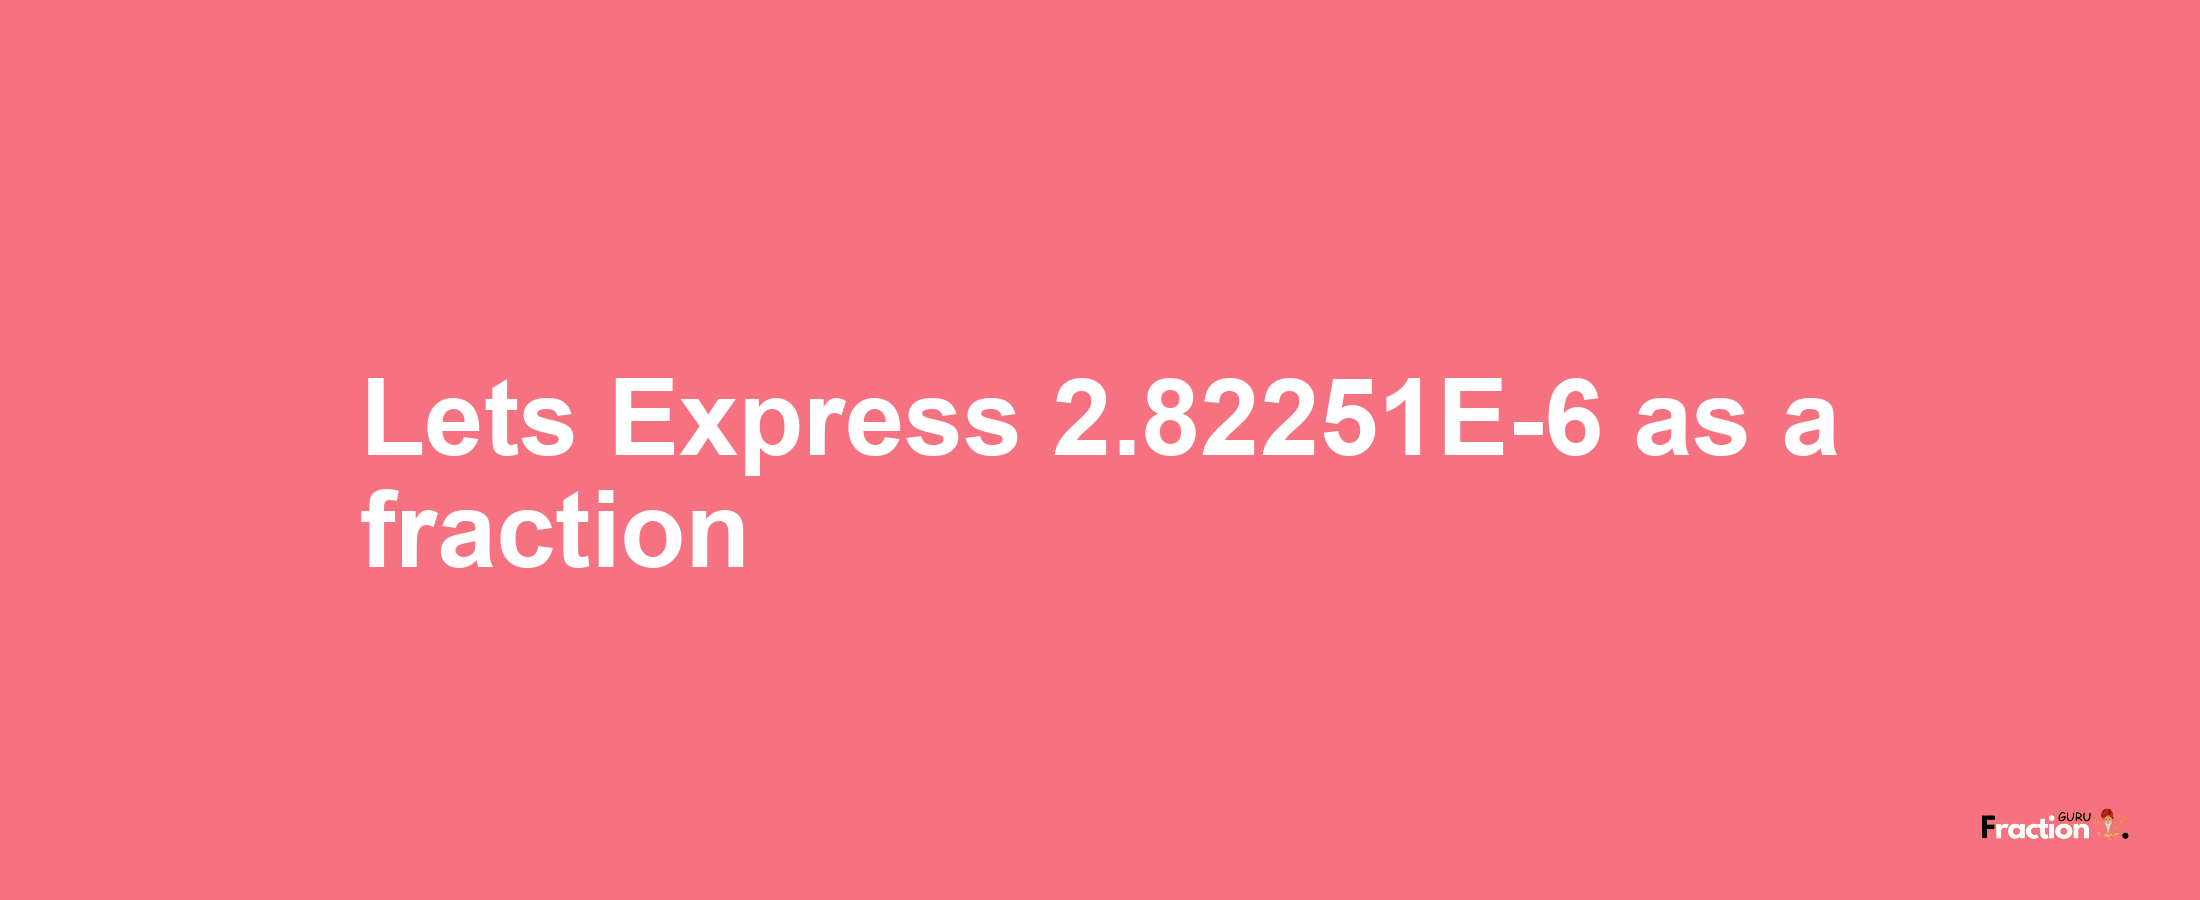 Lets Express 2.82251E-6 as afraction